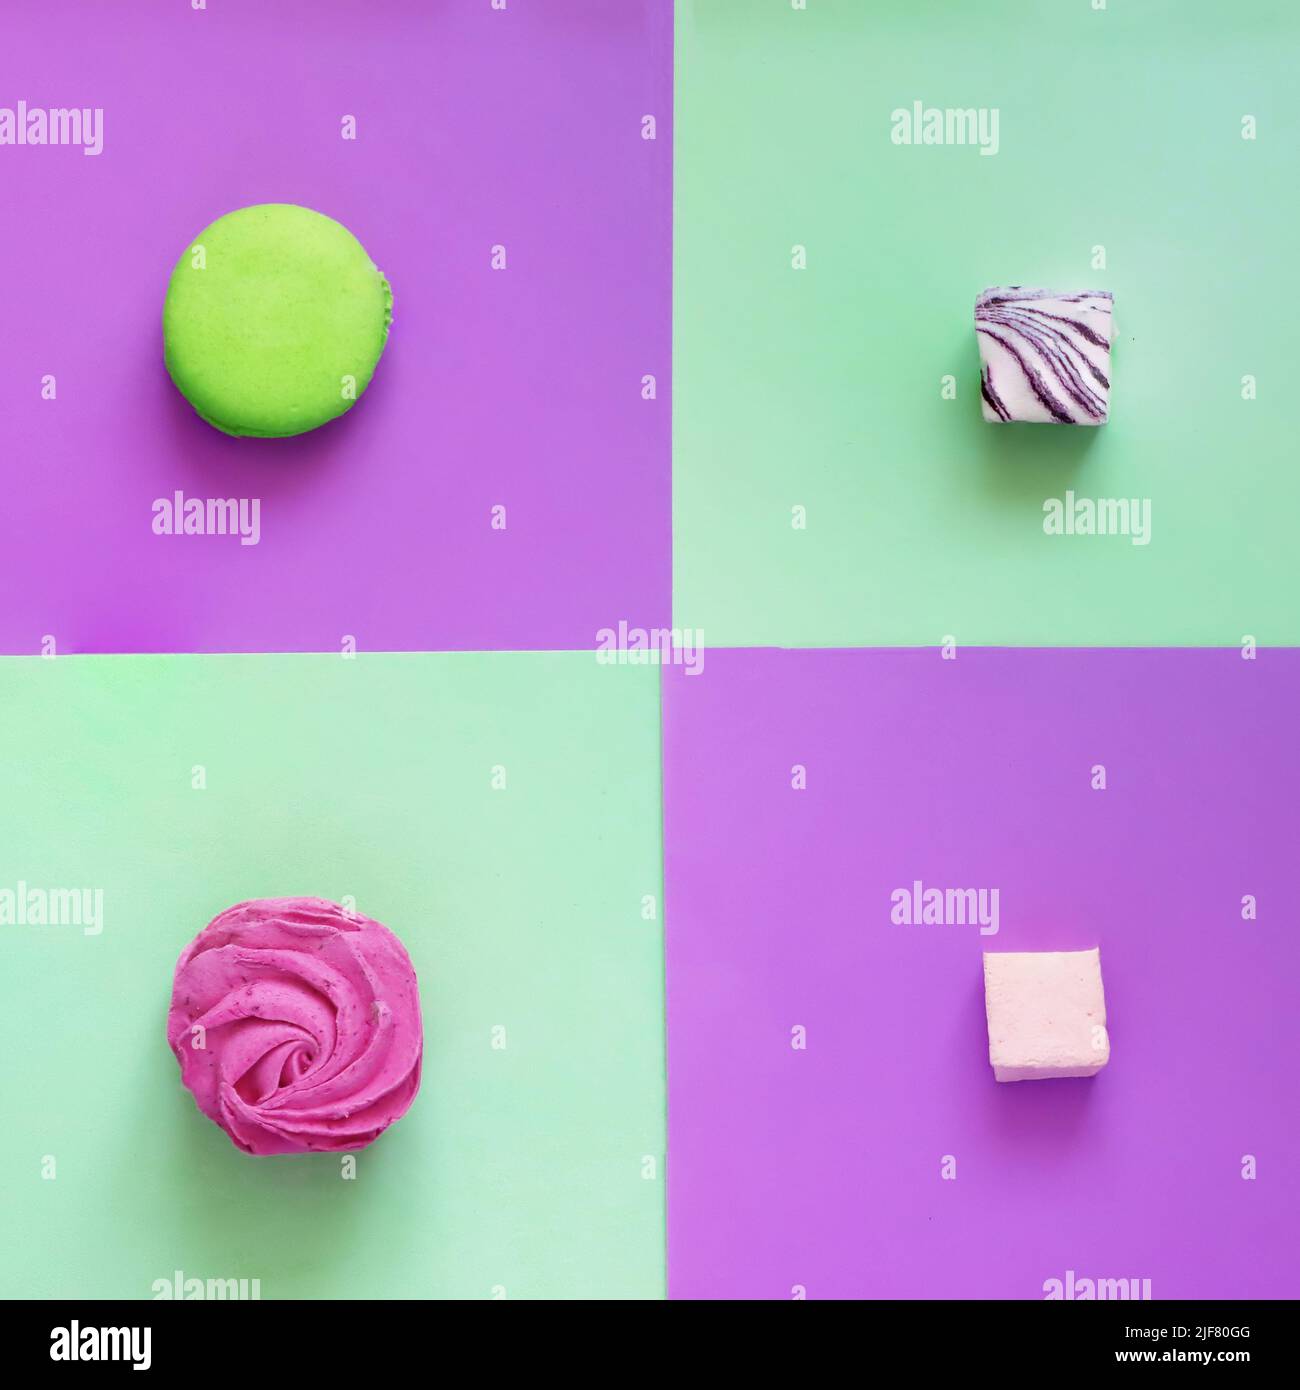 Pop Art. Macaron and marshmallows on colored backgrounds Stock Photo